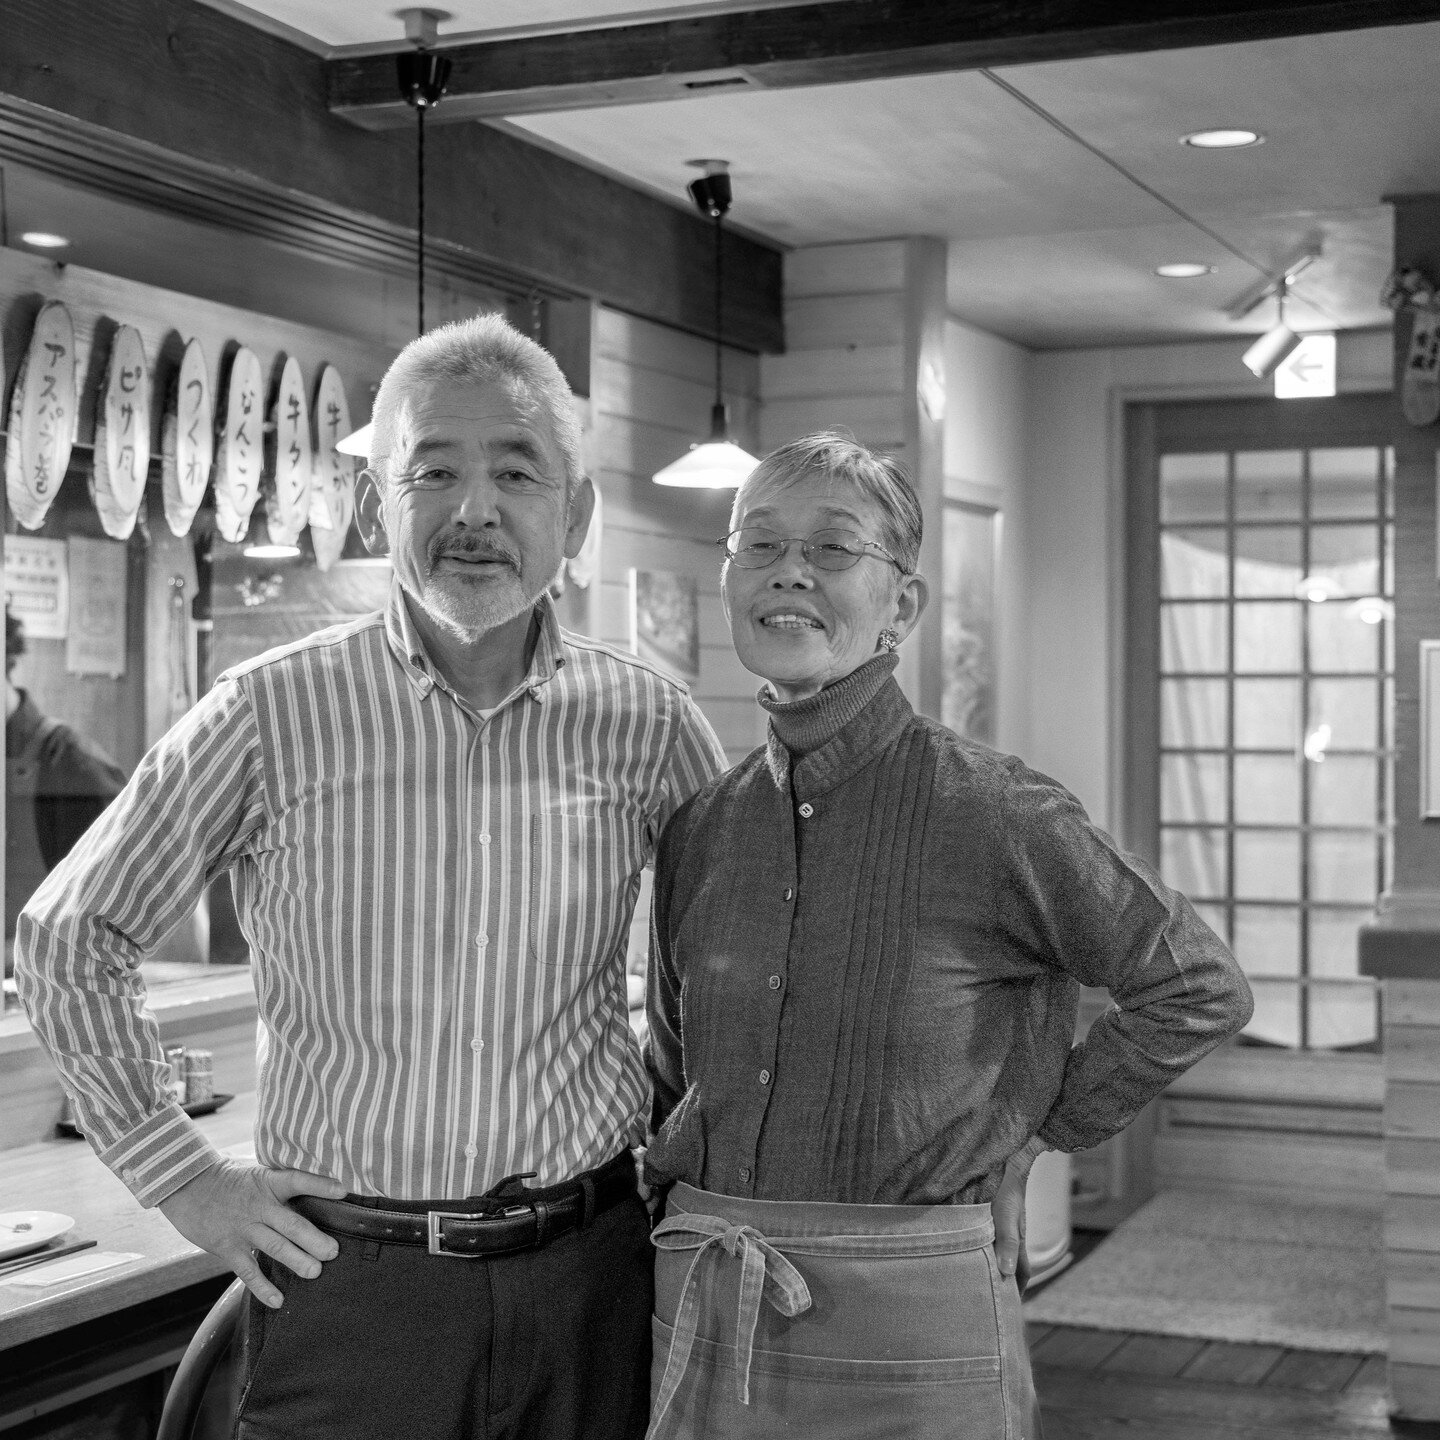 Join us for a conversation with Masa Saito, owner of Bang Bang restaurant on Upper Hirafu&rsquo;s main street, and his wife, Rena Saito. Uncover the story behind its start 39 years ago, the joy of running it, and what makes Bang Bang an icon in the h